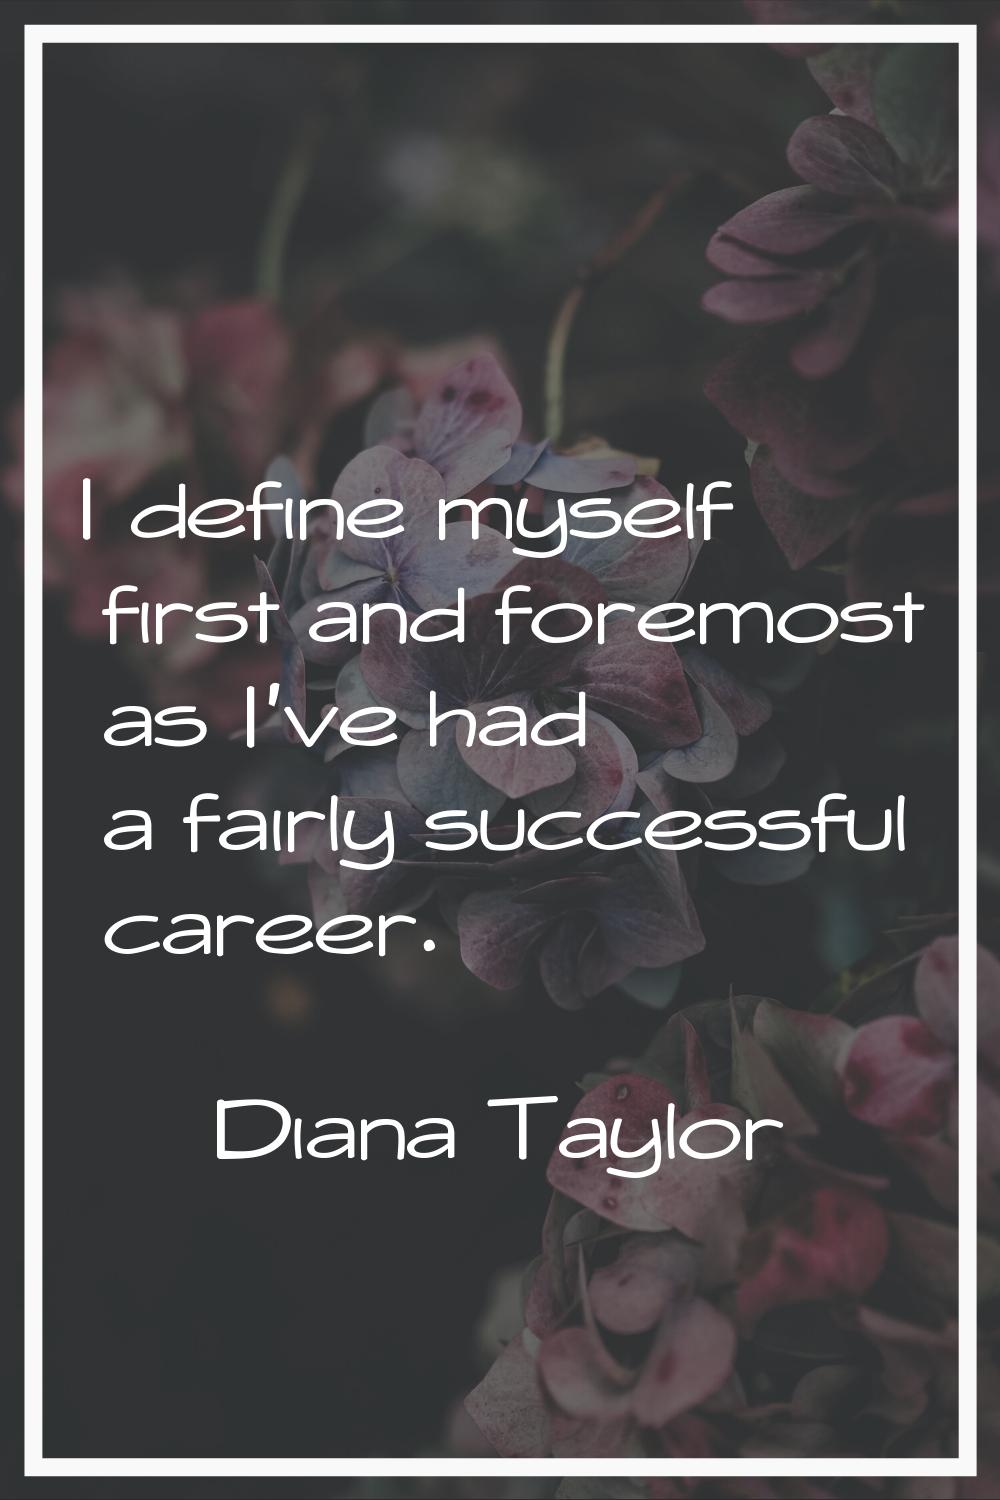 I define myself first and foremost as I've had a fairly successful career.